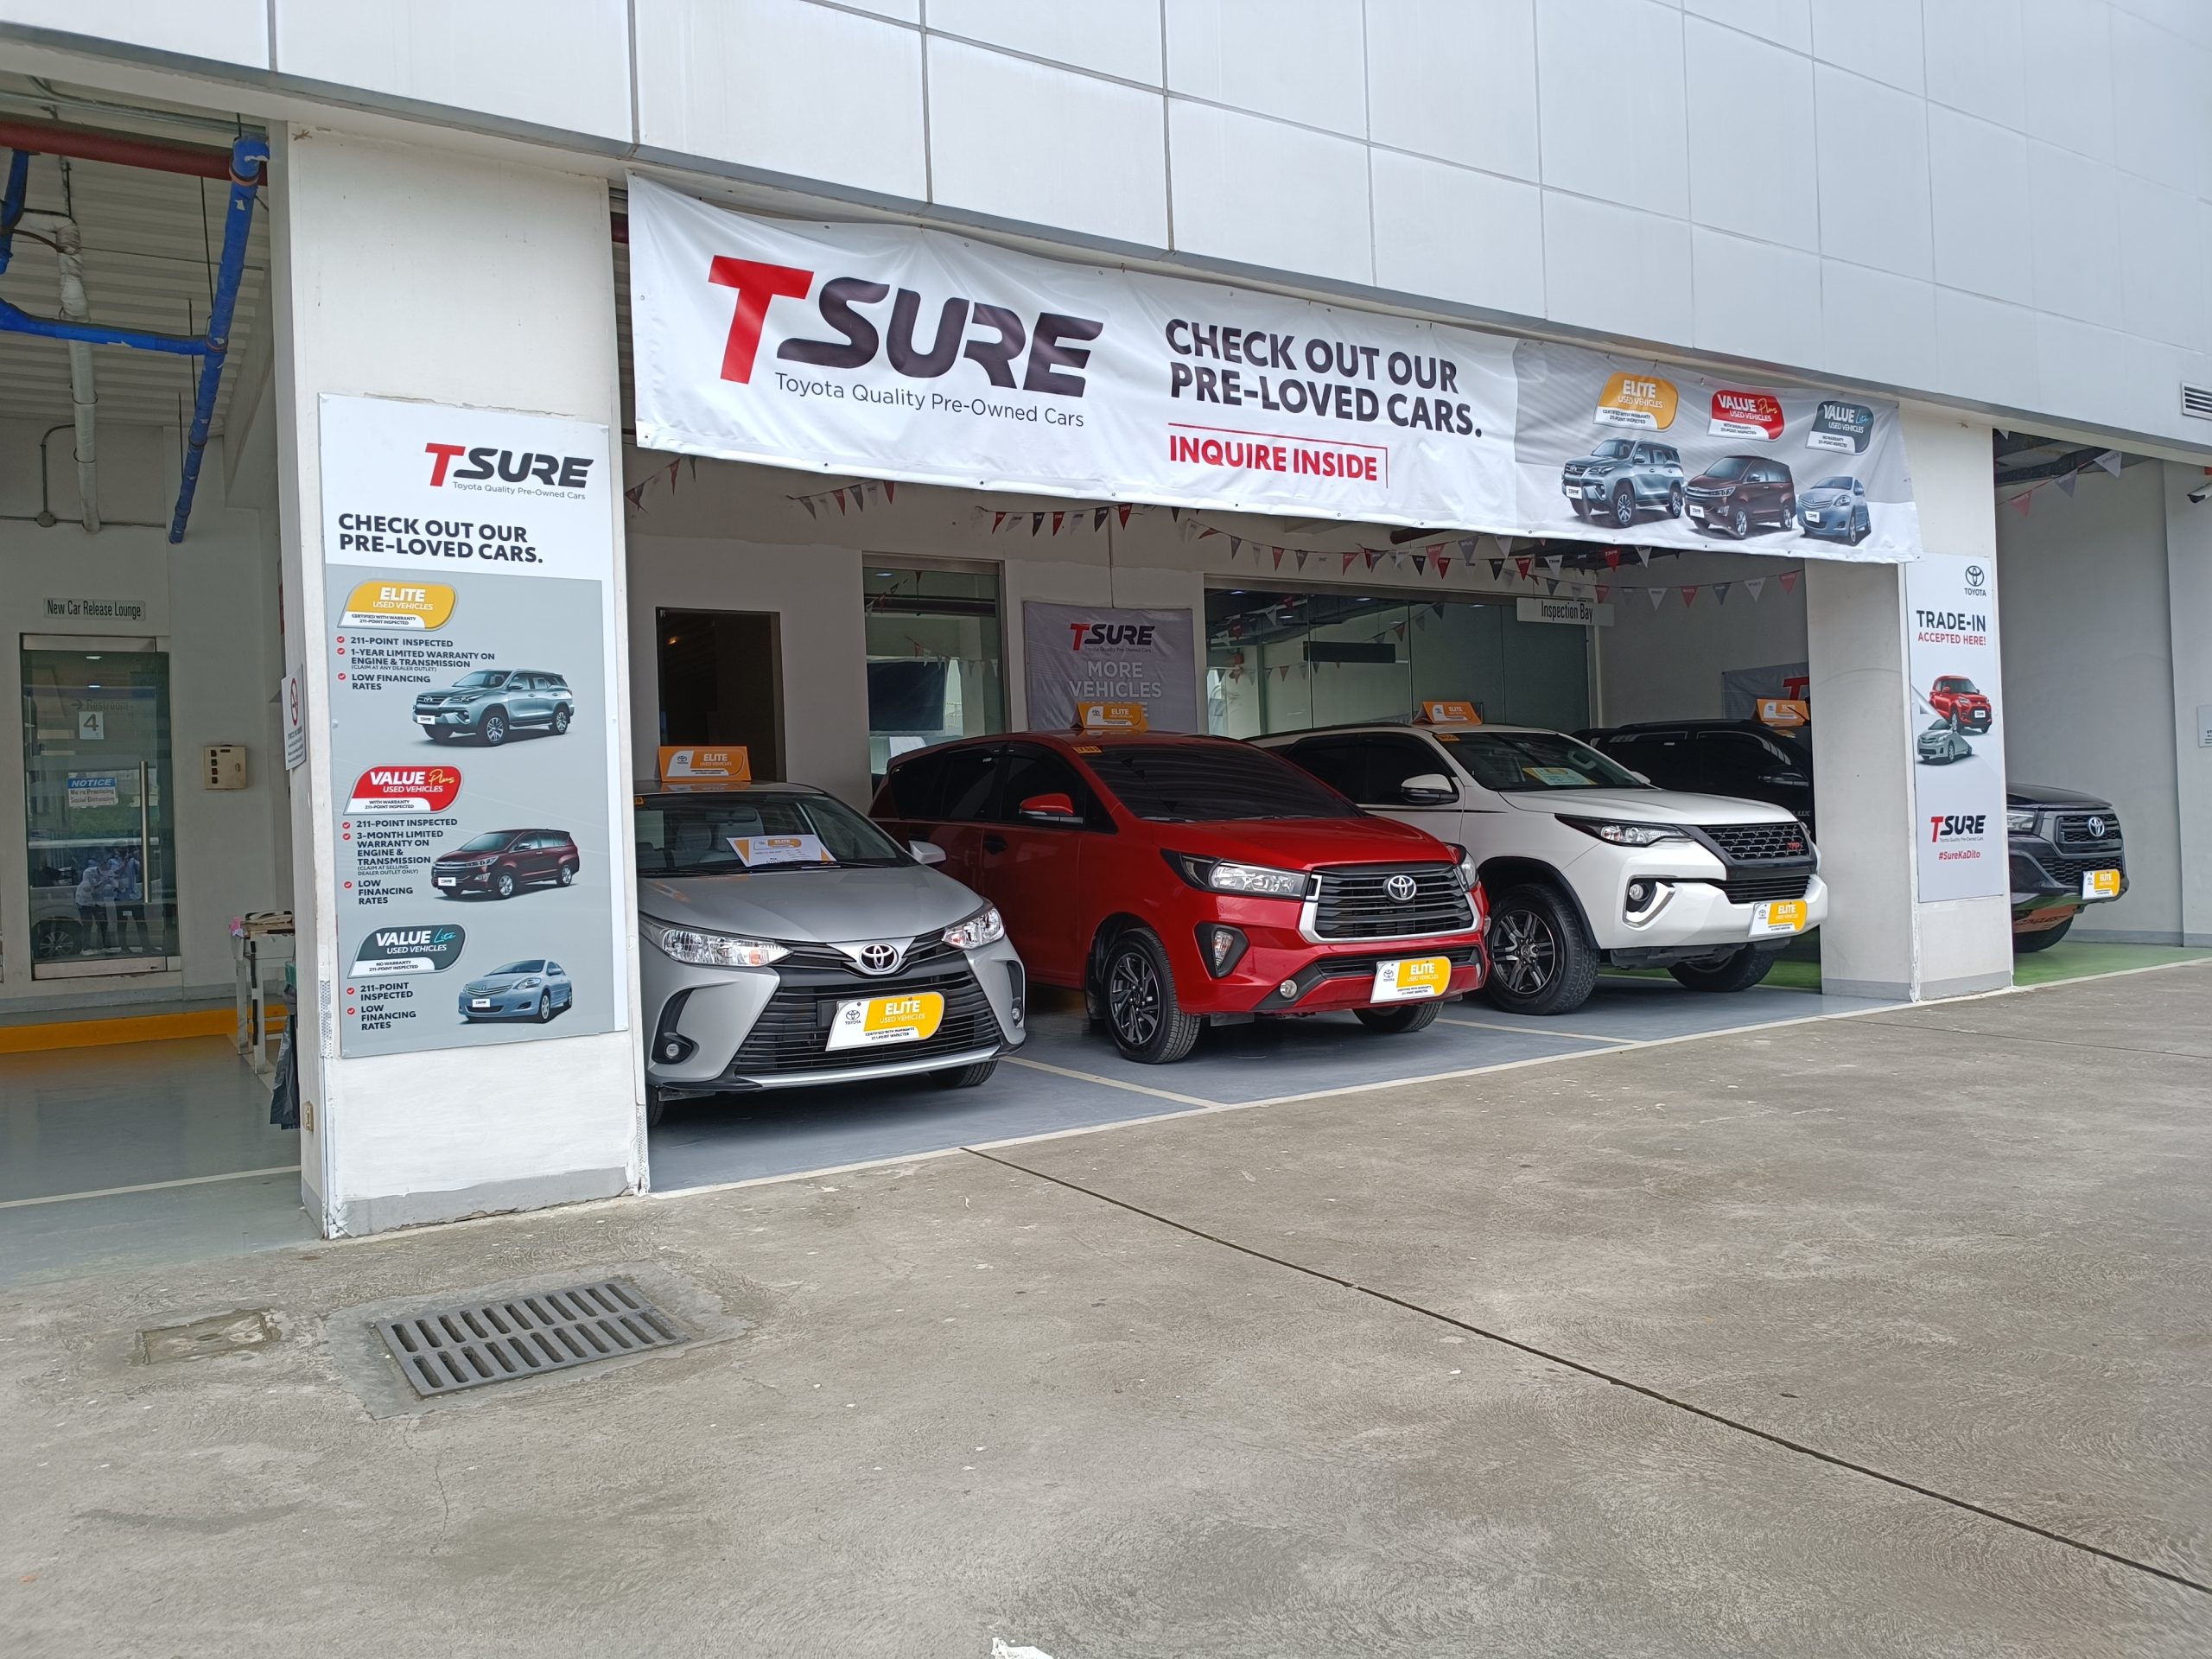 Toyota revamps used cars program for it’s 10th year, now called T-SURE